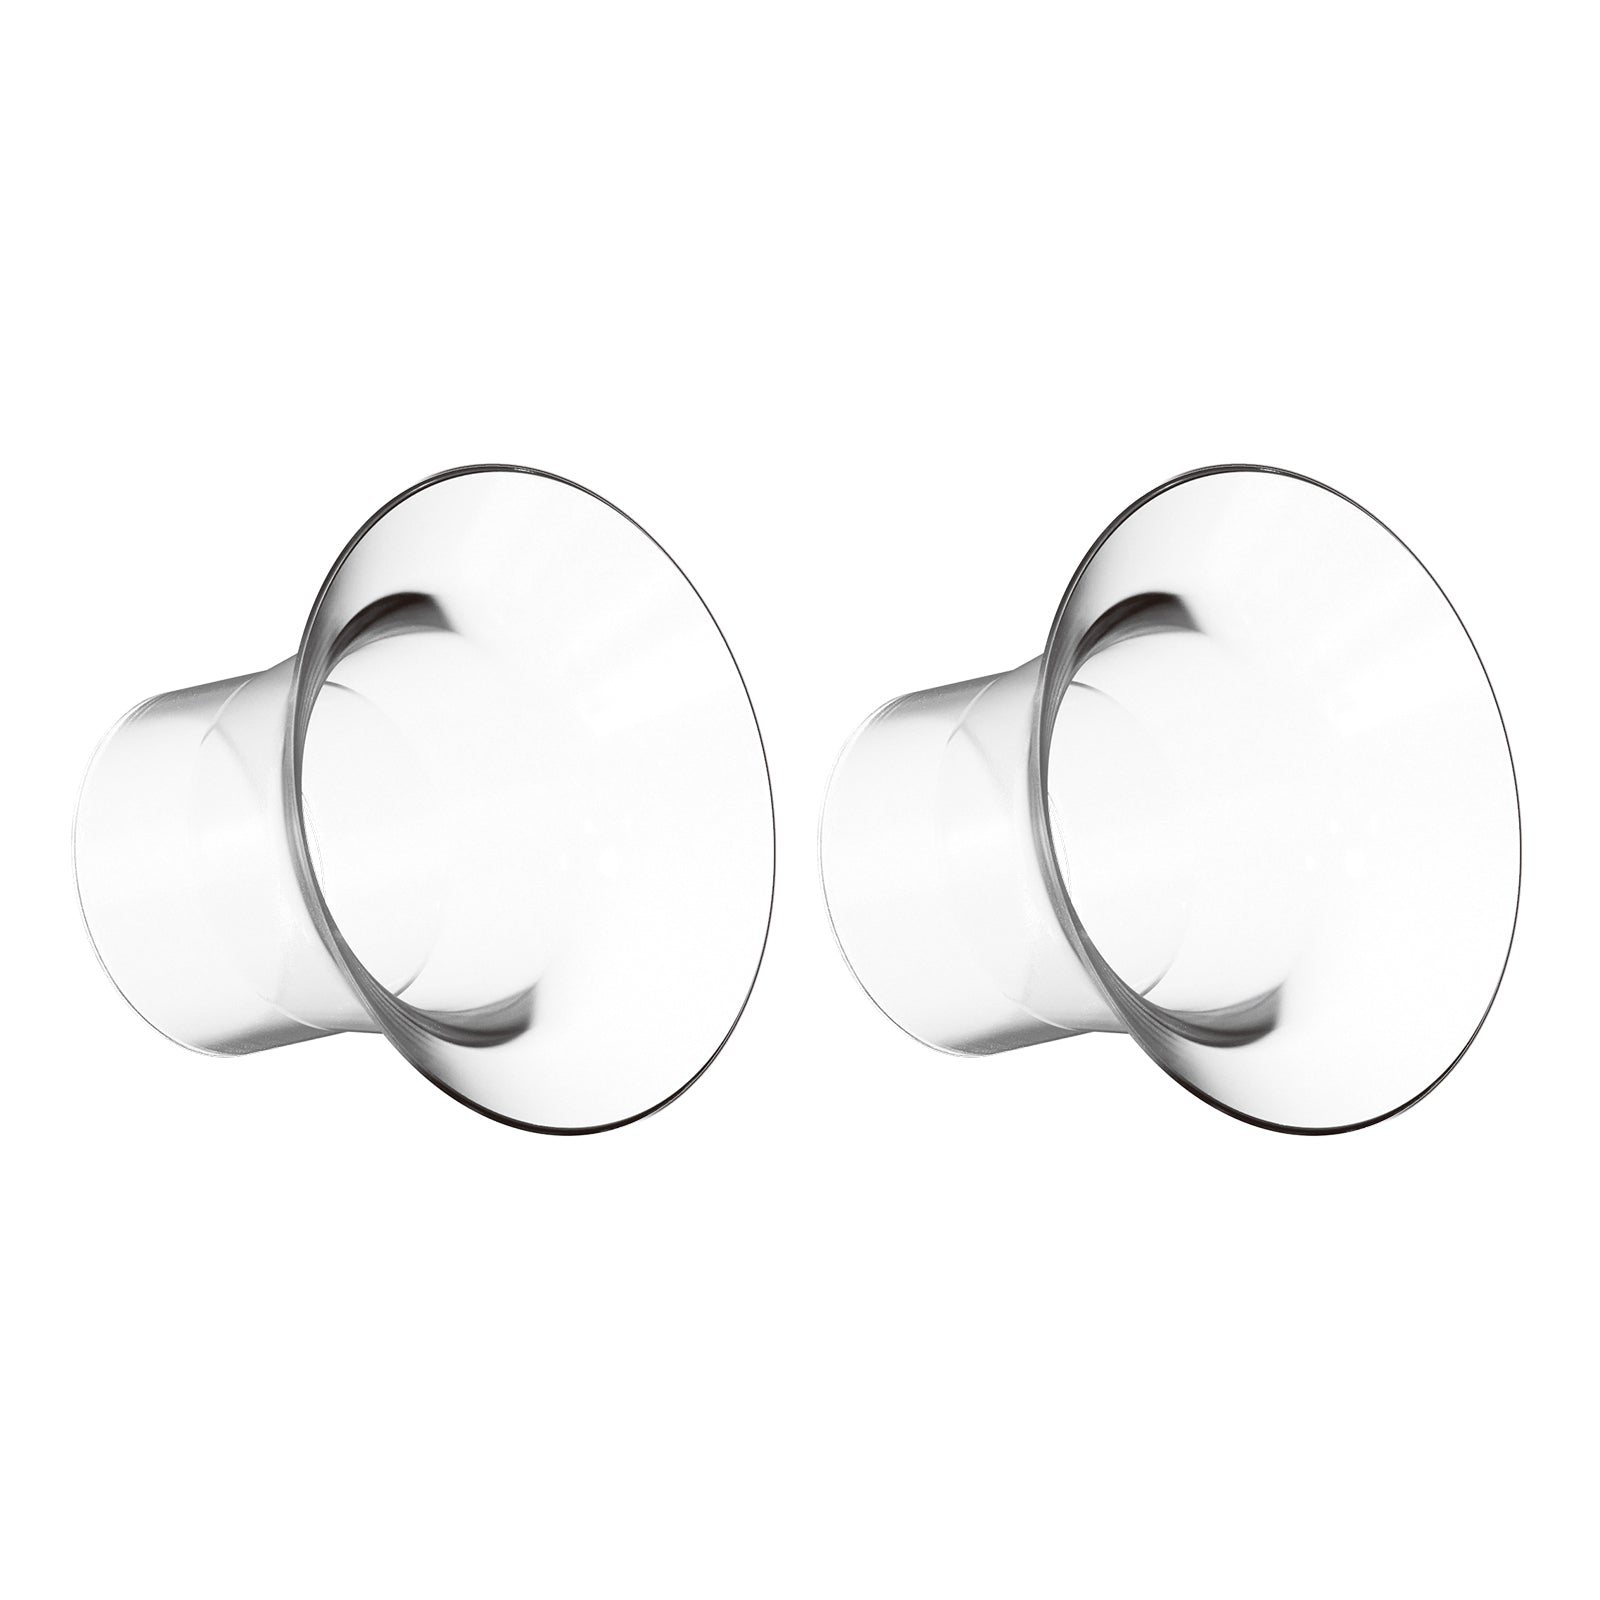 MISSAA 21/24mm Flange Insert Compatible With HF918 Breast Pump, 2 Pack